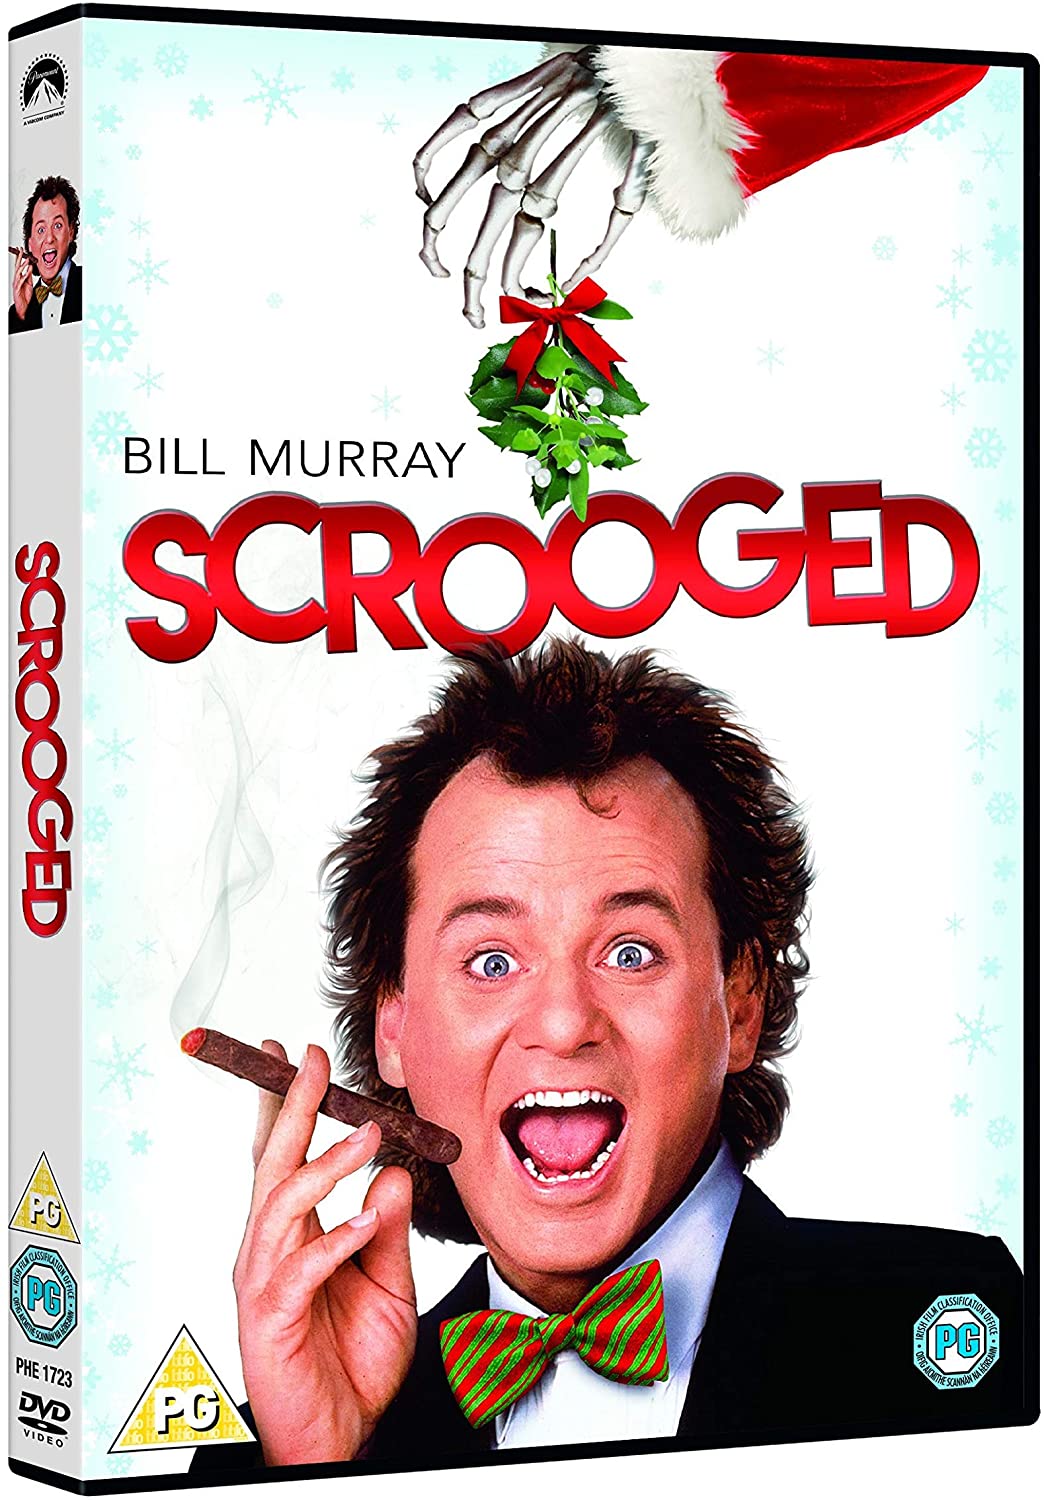 Scrooged (2012 Re-pack) - Fantasy/Comedy [DVD]